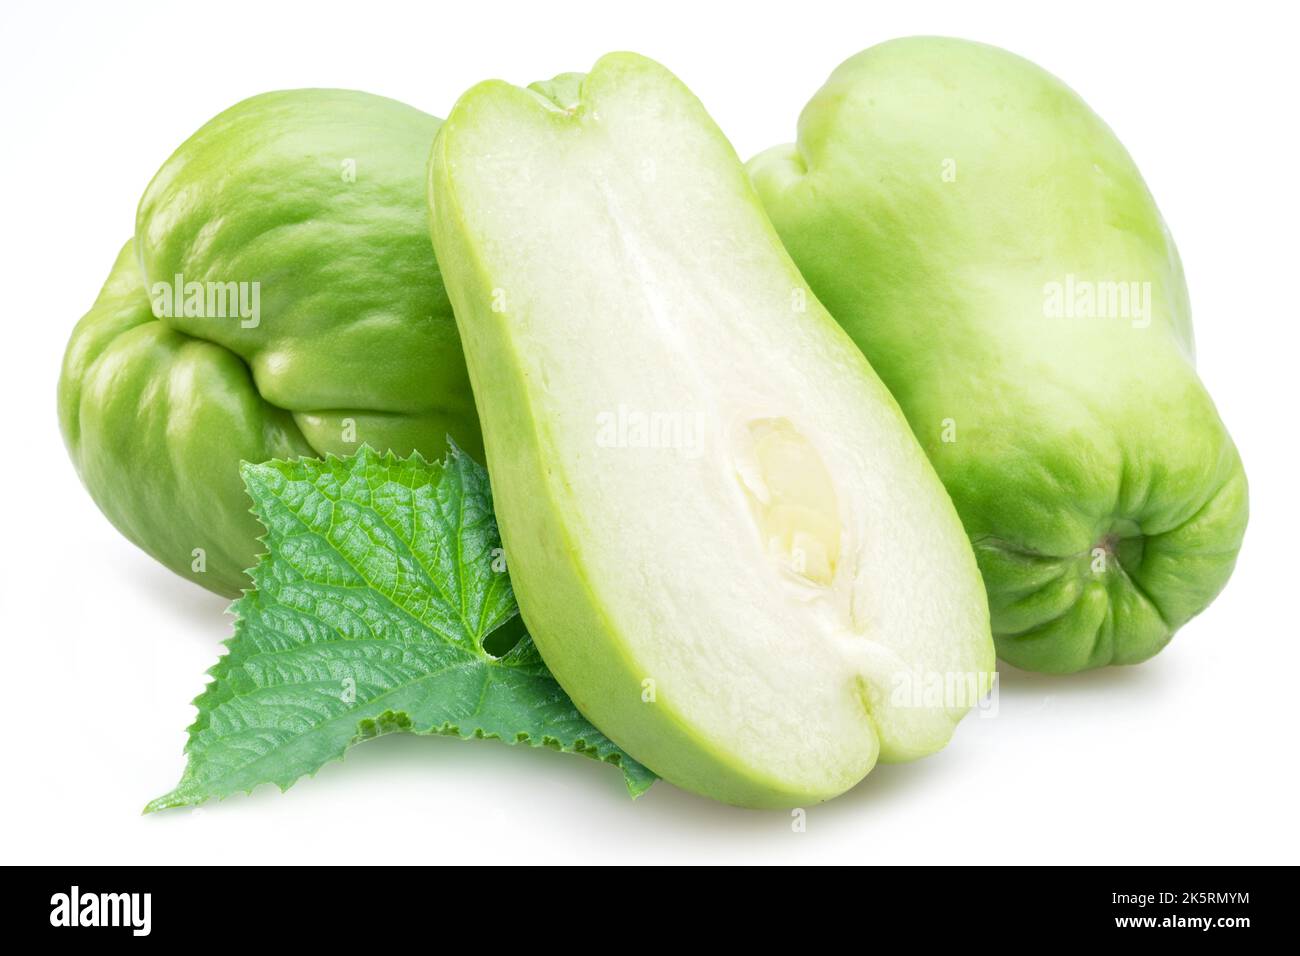 Chayote fruits and half of chayote fruit isolated on white background. Stock Photo